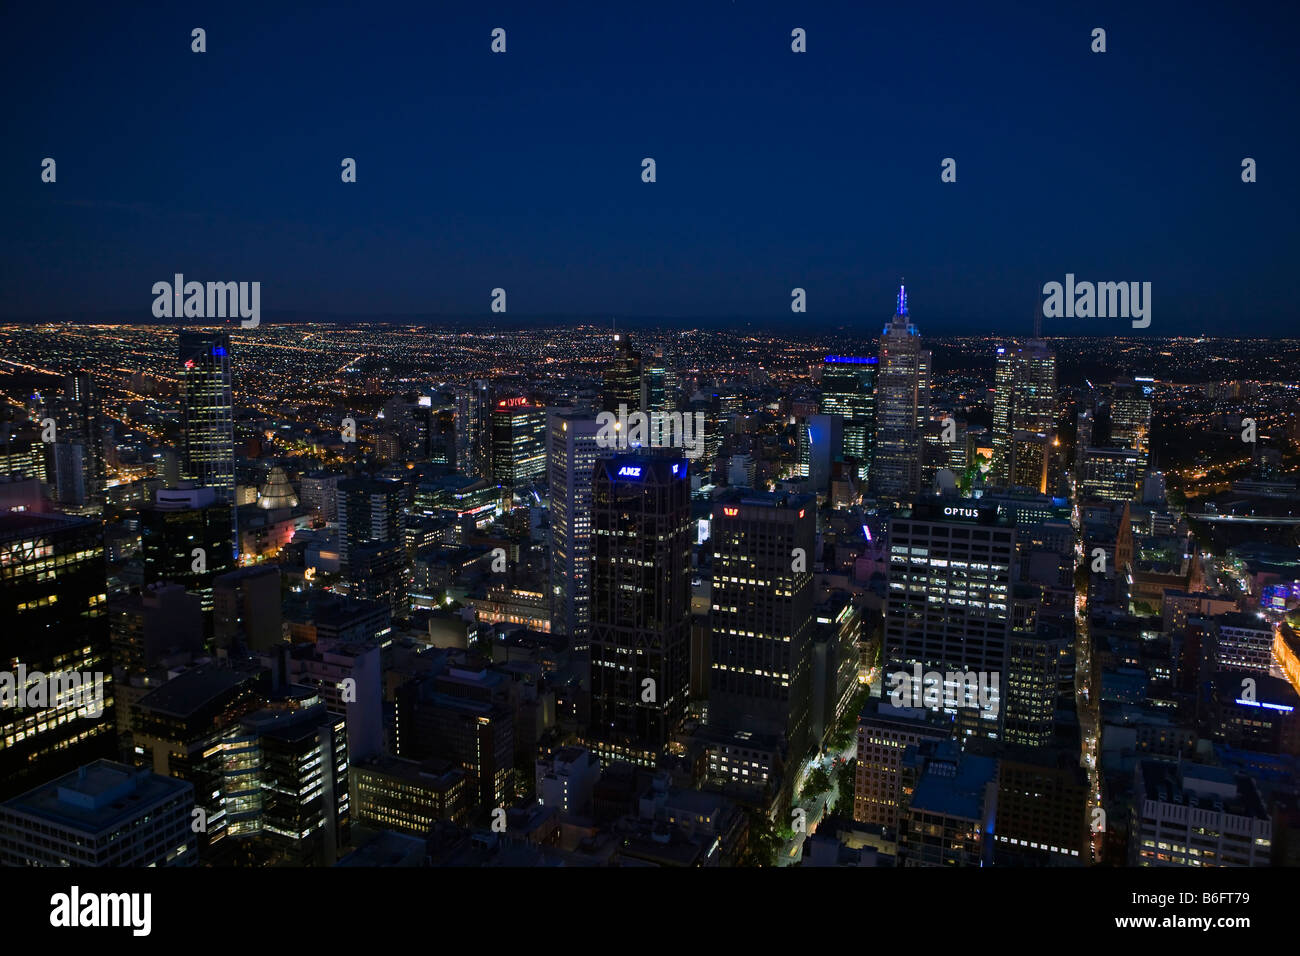 Aerial view of Melbourne, Victoria, Australia city skyline and buildings at night Stock Photo